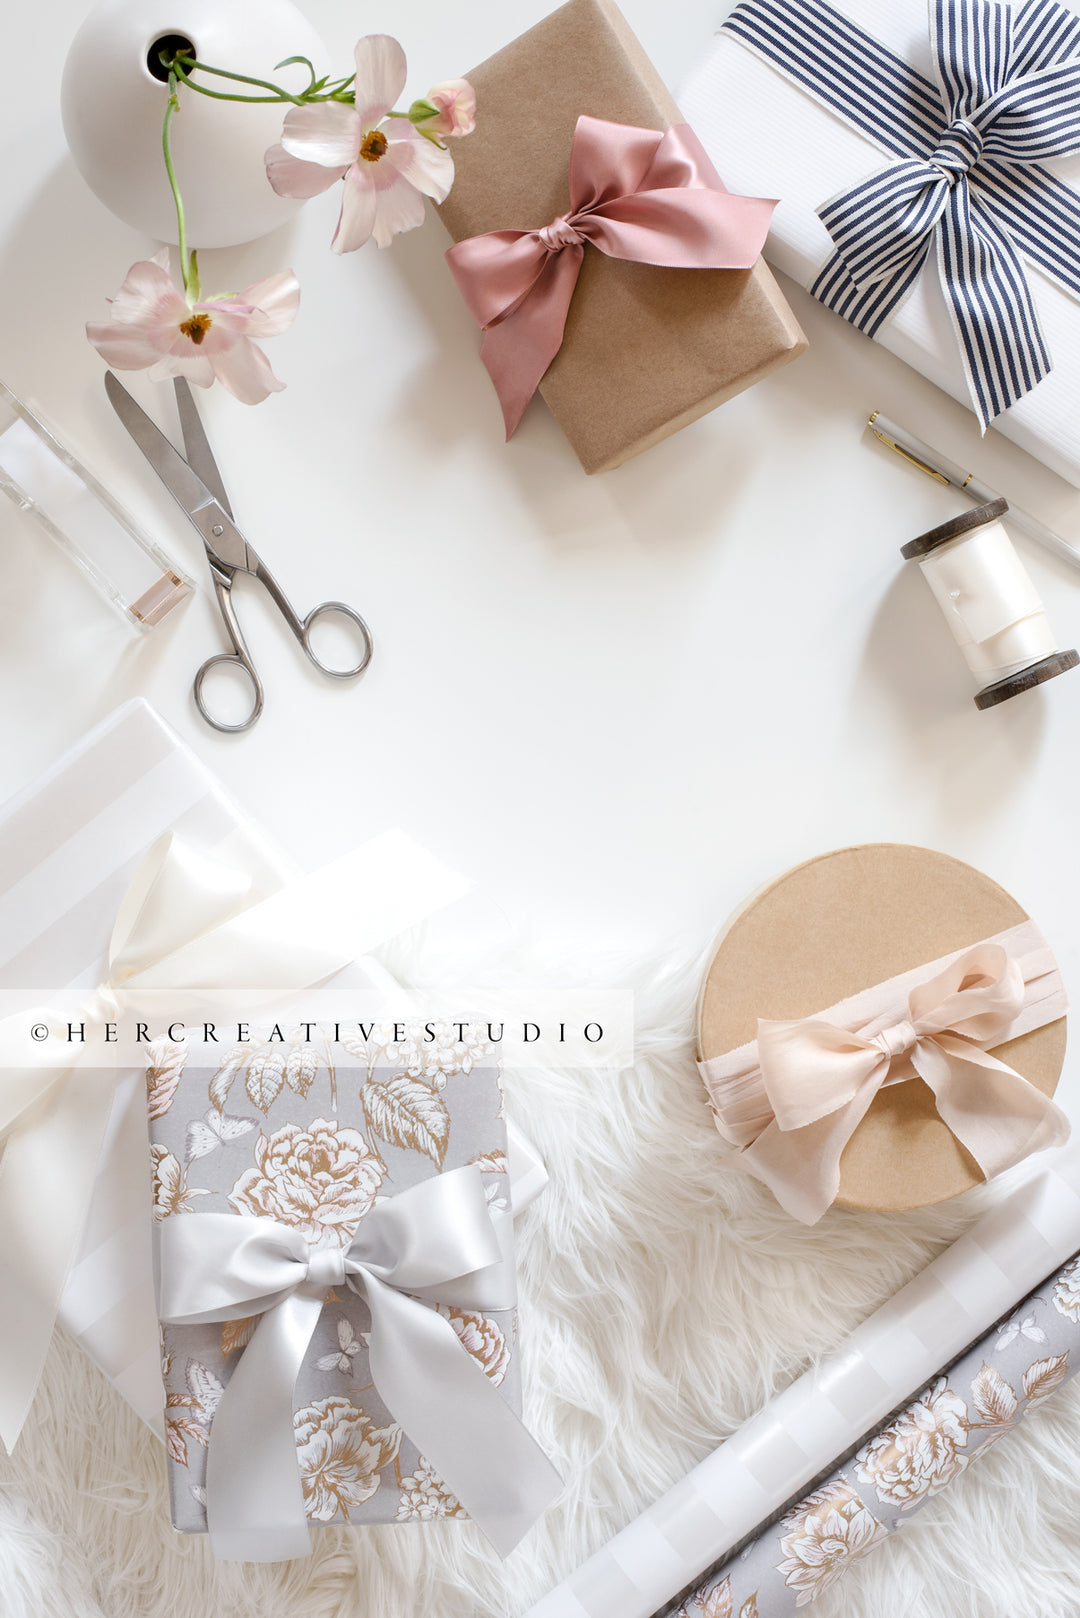 Gifts, Laptop & Pretty Wrapping Paper. Stock Image